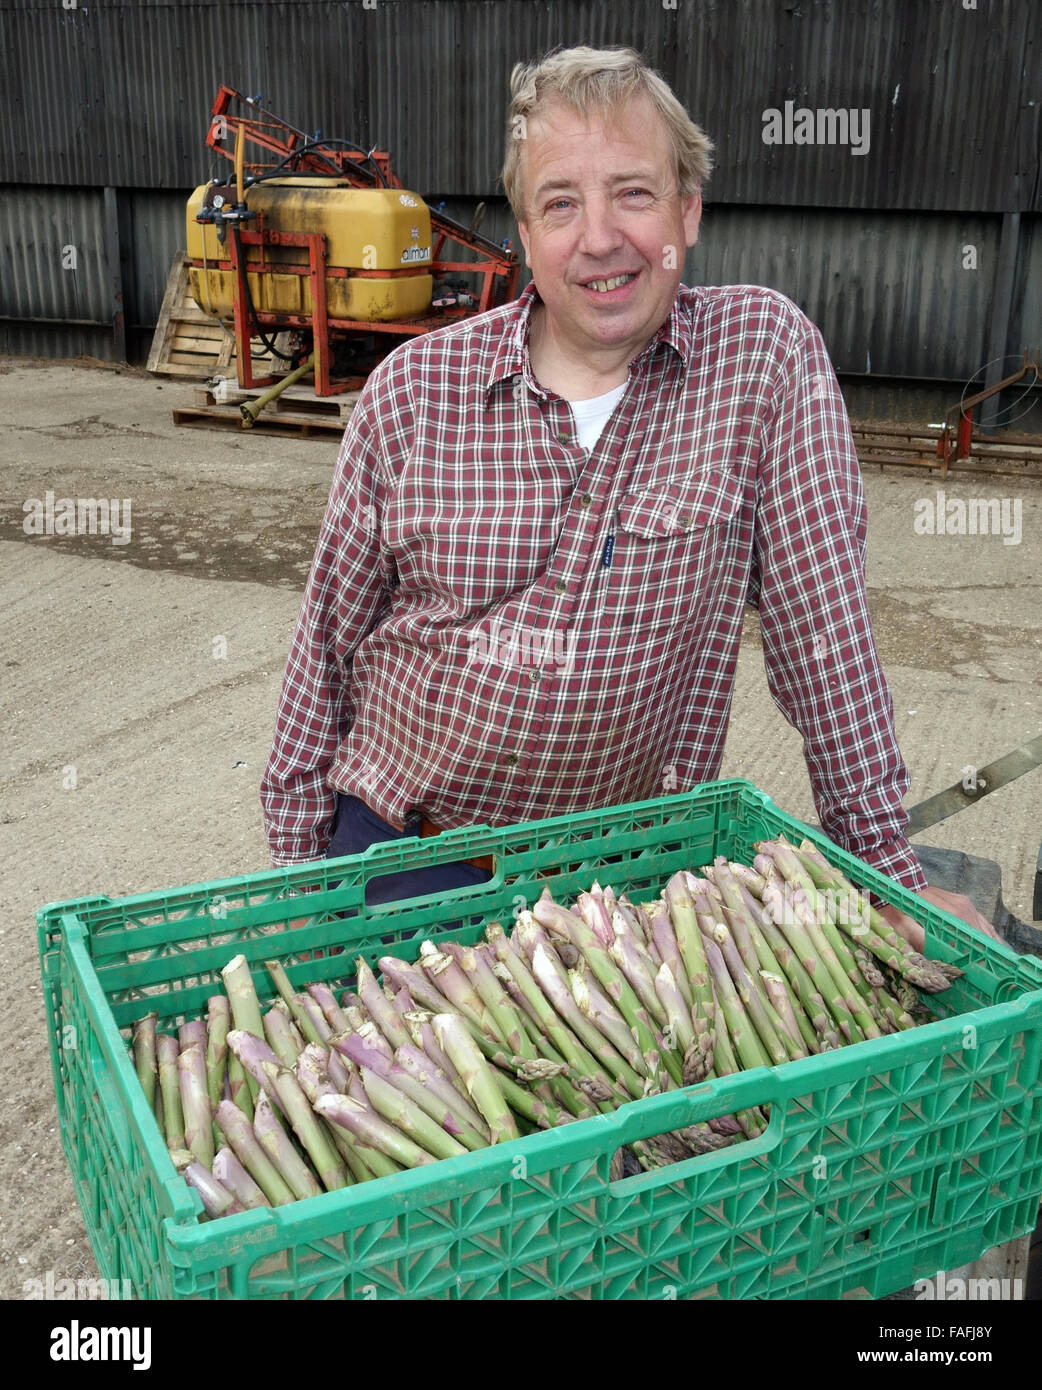 Farmer with a crate of freshly cut English asparagus Stock Photo